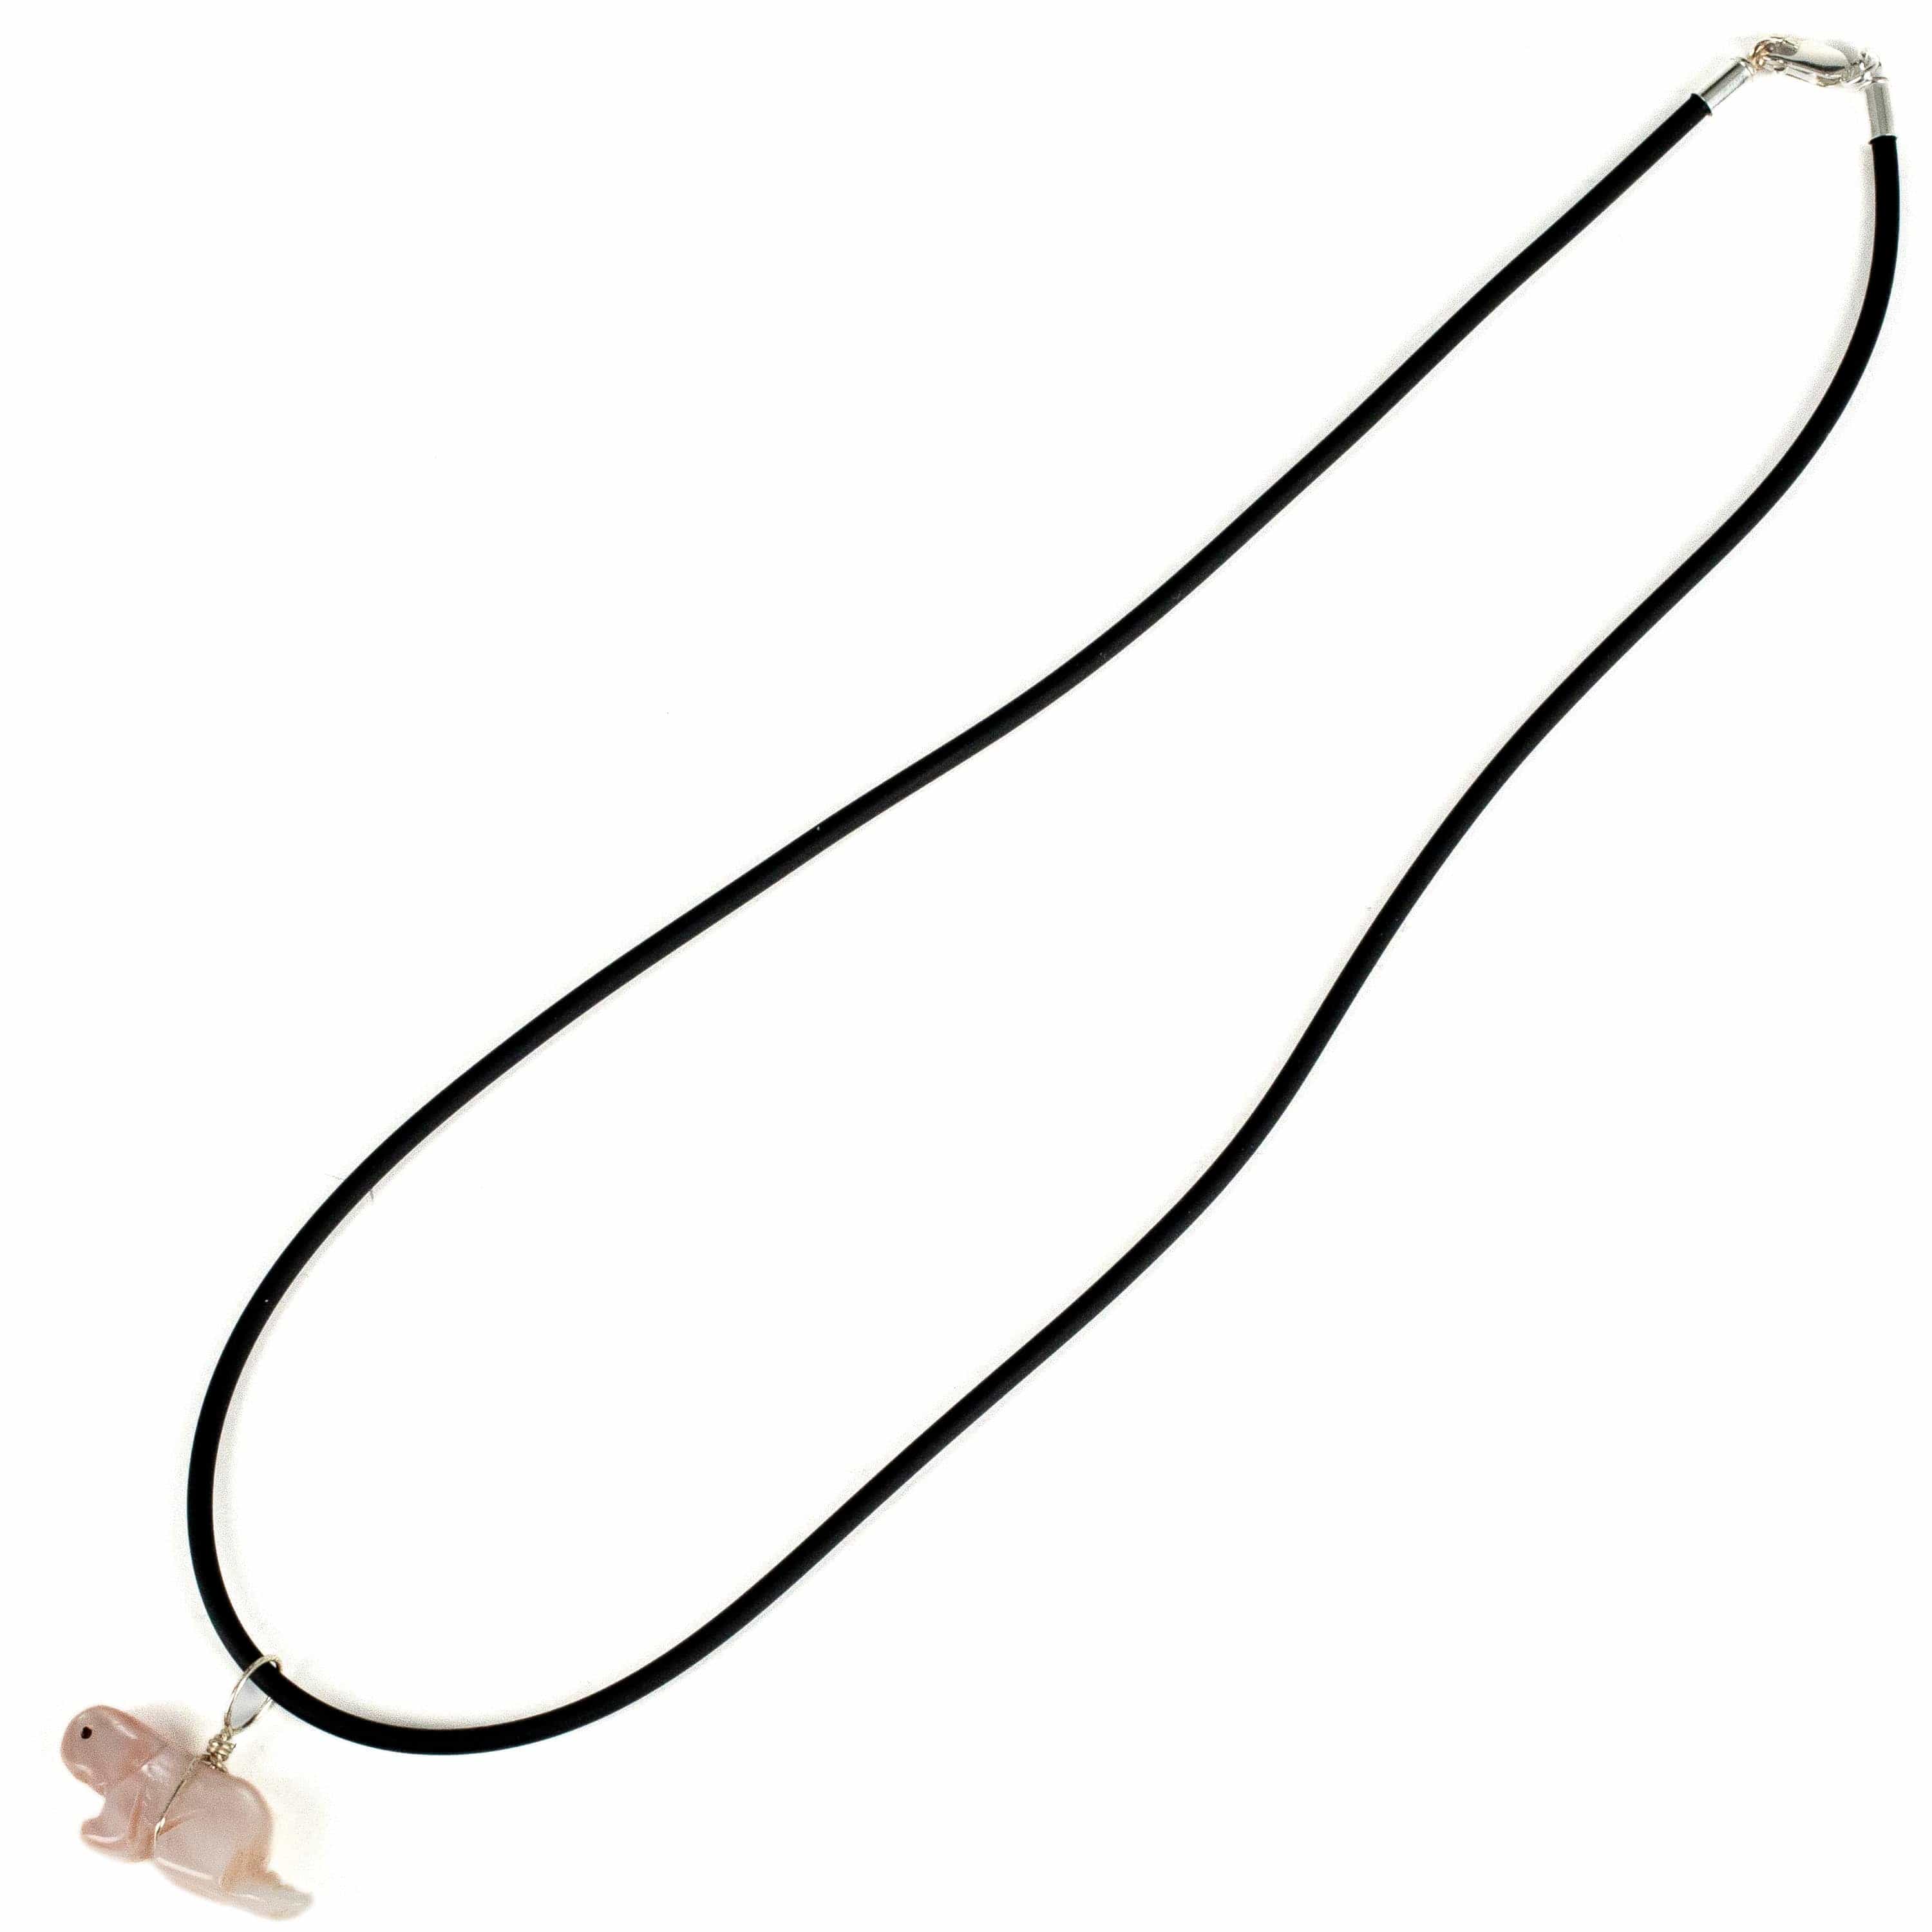 Kalifano Native American Jewelry Pink Mother of Pearl Fetish Carving USA Native American Made Necklace with Leather Cord NAN80.004